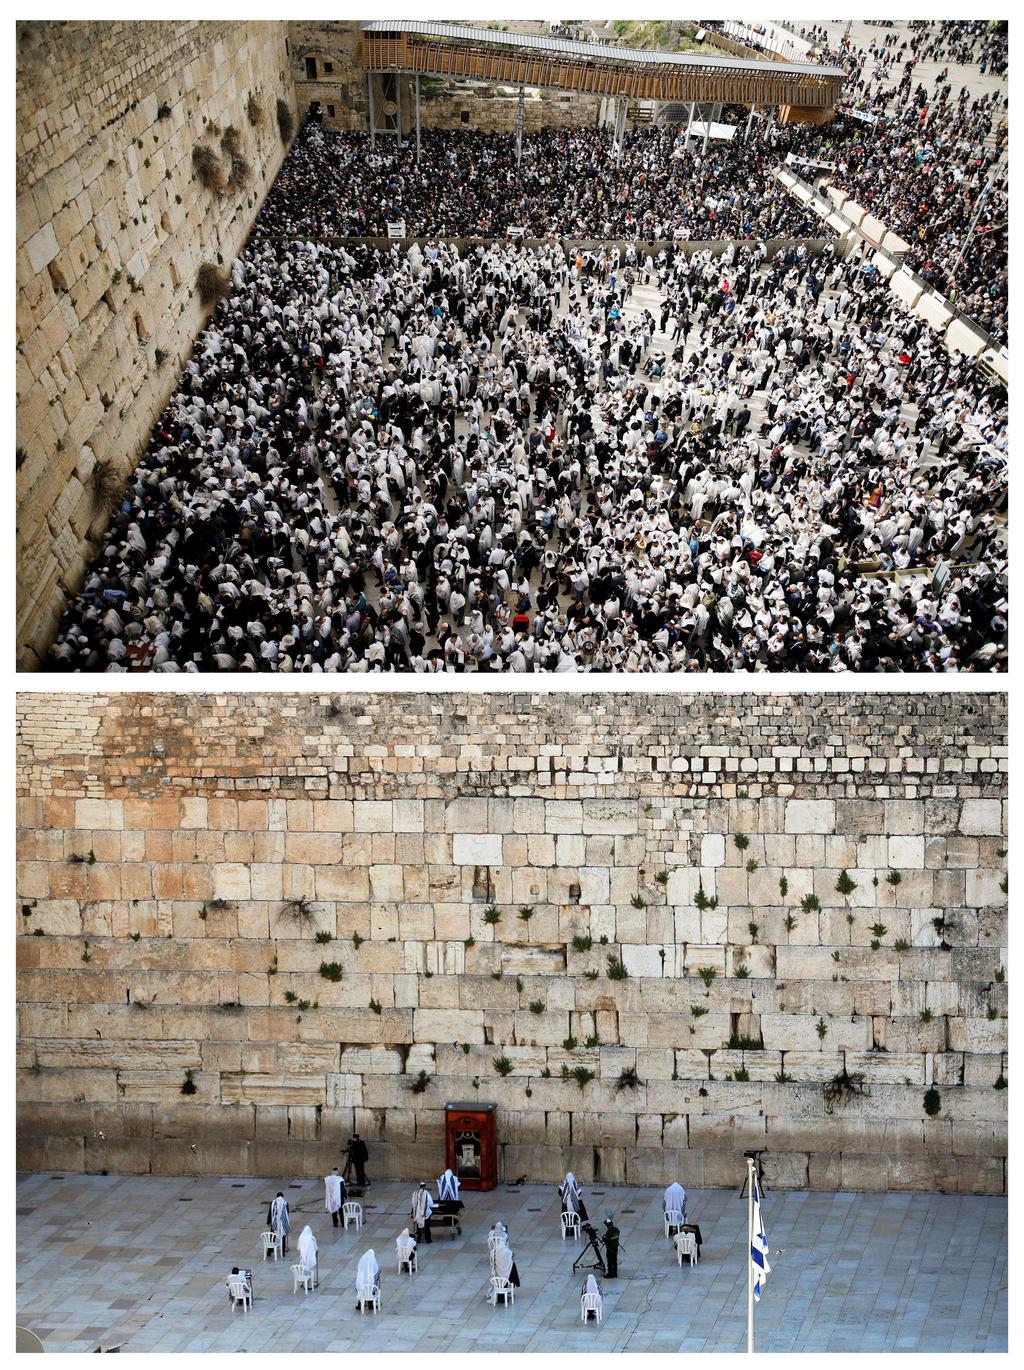 Top: Thousands of worshippers taking part in the priestly blessing during Passover 2017; bottom: The small number of worshippers at this year's blessing 